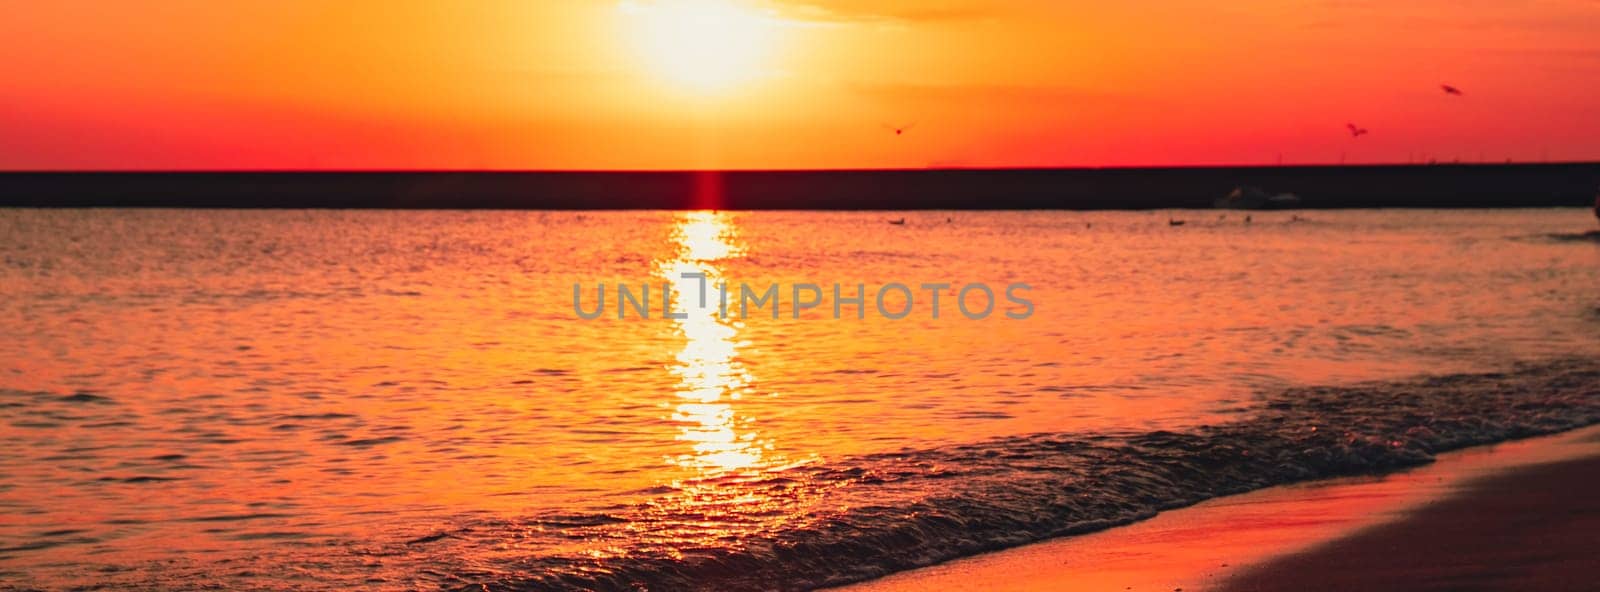 Reflection of sunlight over sea surface at sunset. Orange and gold blue sky. Dramatic Yellow sun coming out of the sea. Majestic summer landscape by anna_stasiia